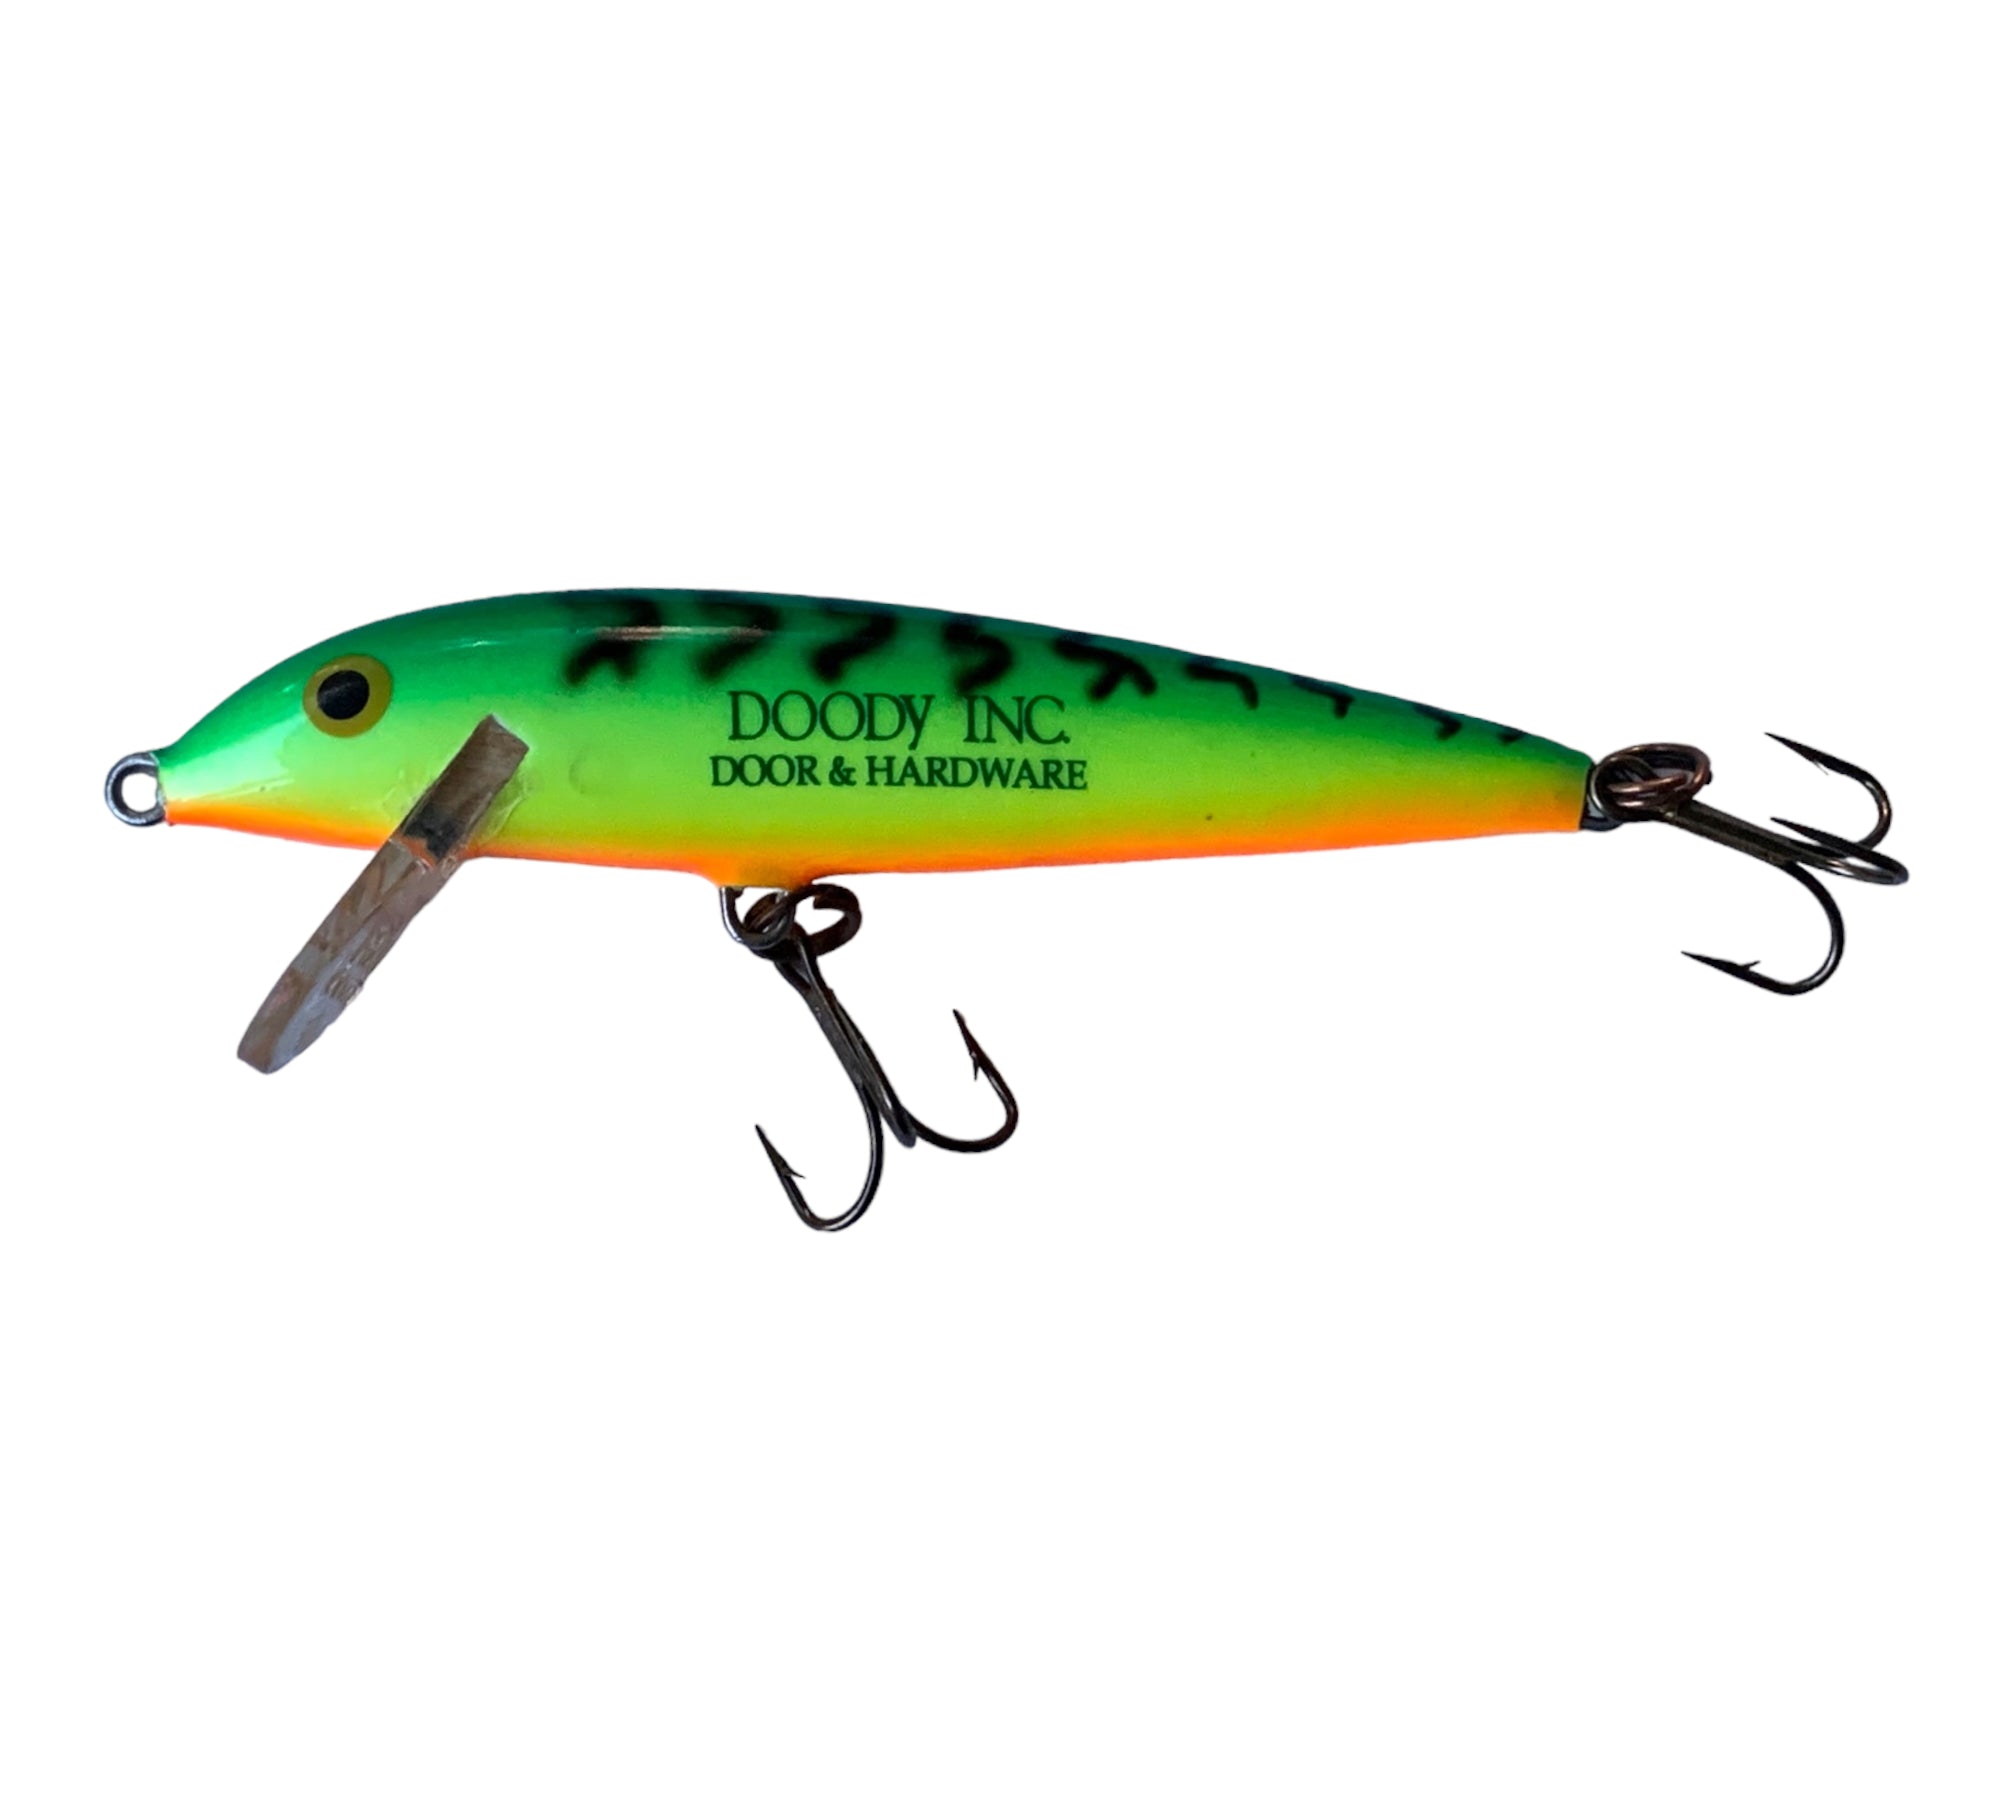 Lot of 2 Rapala CD 9 FT Fire Tiger 2nd Gen Countdown Ireland Lure